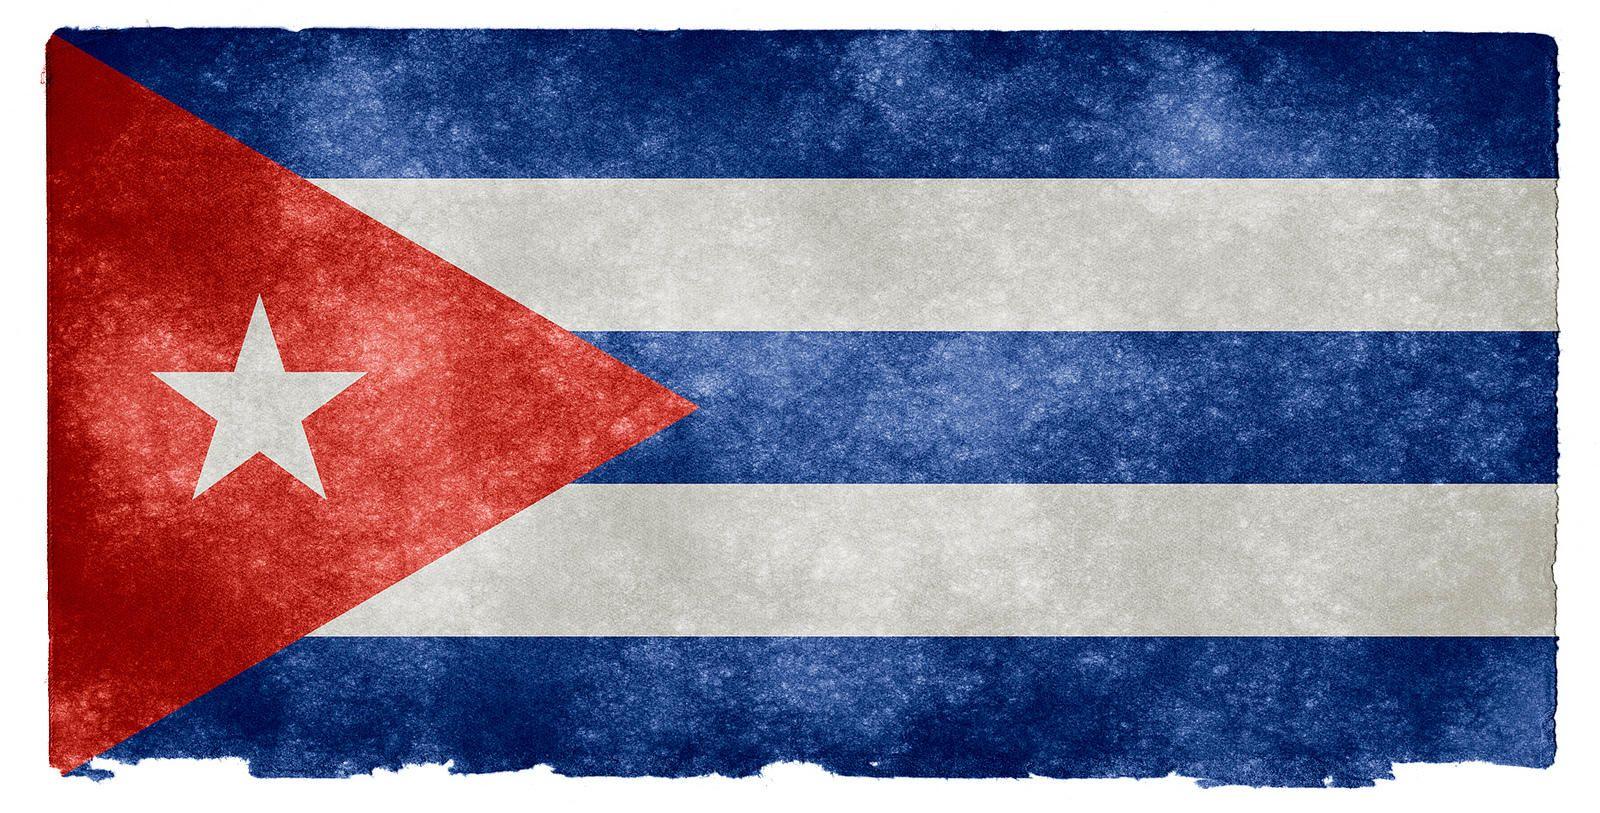 After President Obama's Visit, Changes Coming to Cuba. Connecticut